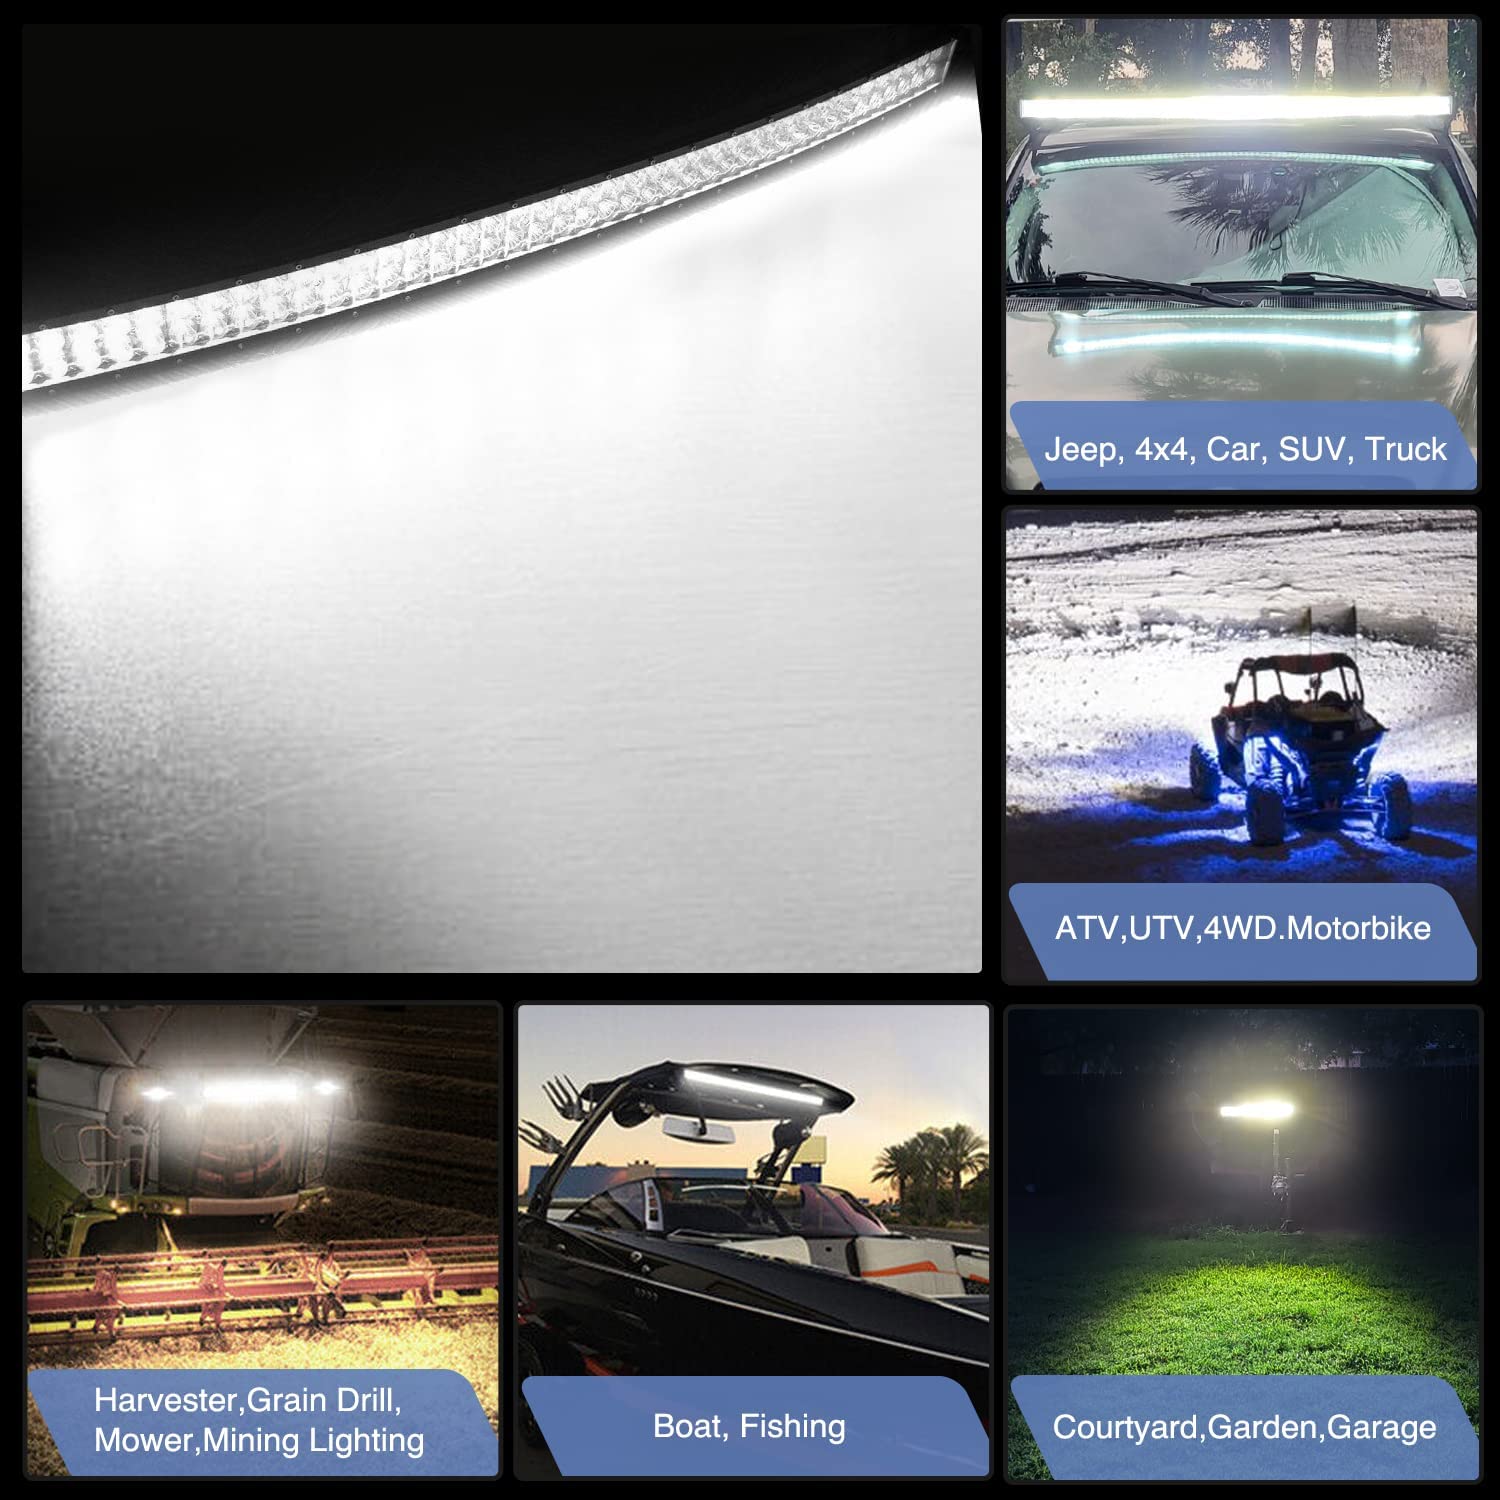 52 Inch 300W Flood Spot Combo LED Light Bar 2PCS 4Inch 18W Spot LED pods with Wiring Harness Kit-3 Leads